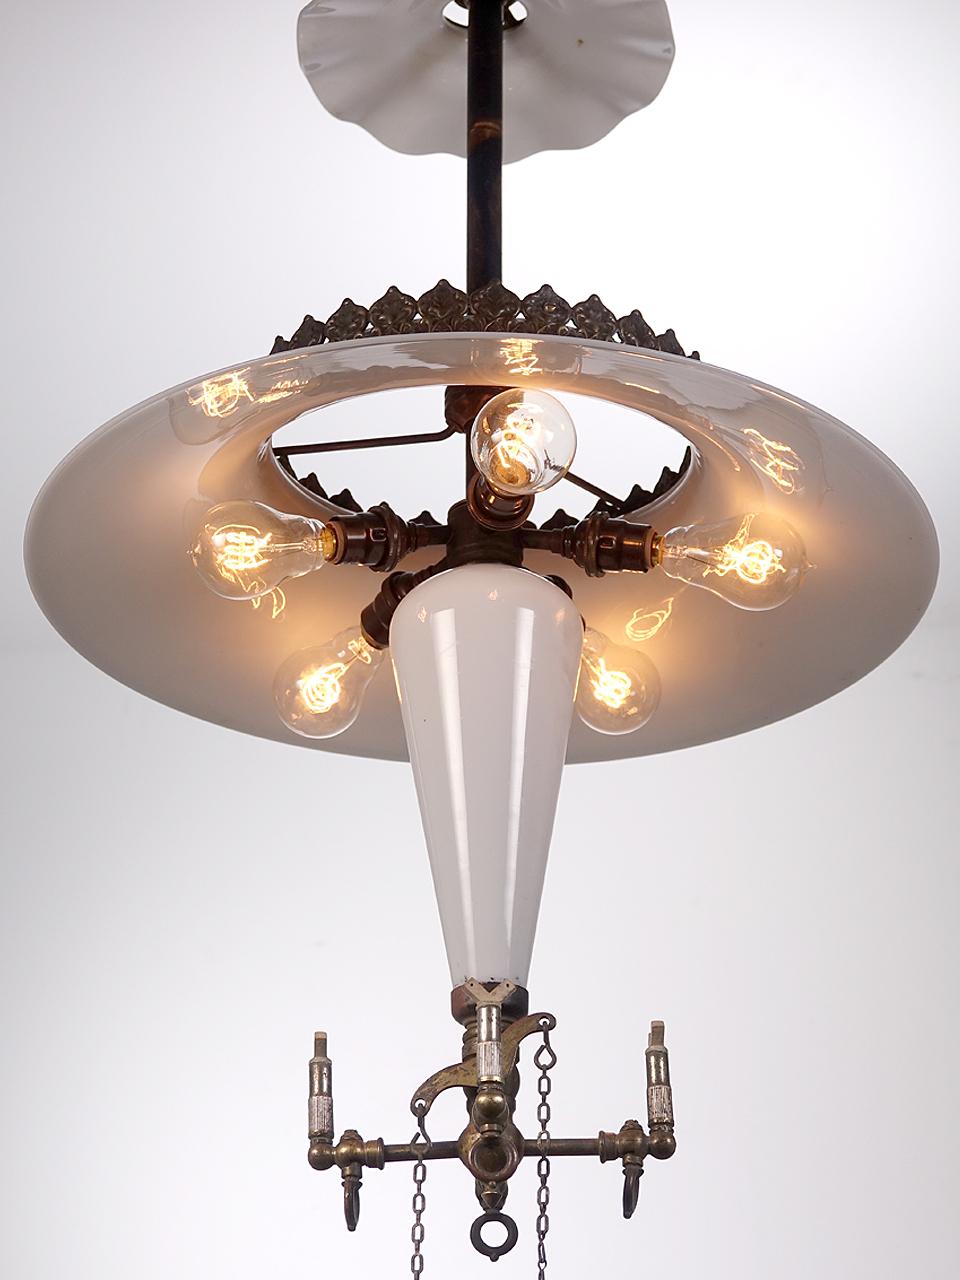 This is a lamp that you would have found hanging in an early Pharmacy. They have great detail including a large 17 inch tented milk glass shade and brass crown. The central milk glass cone reflector is its most unique feature that is found only on